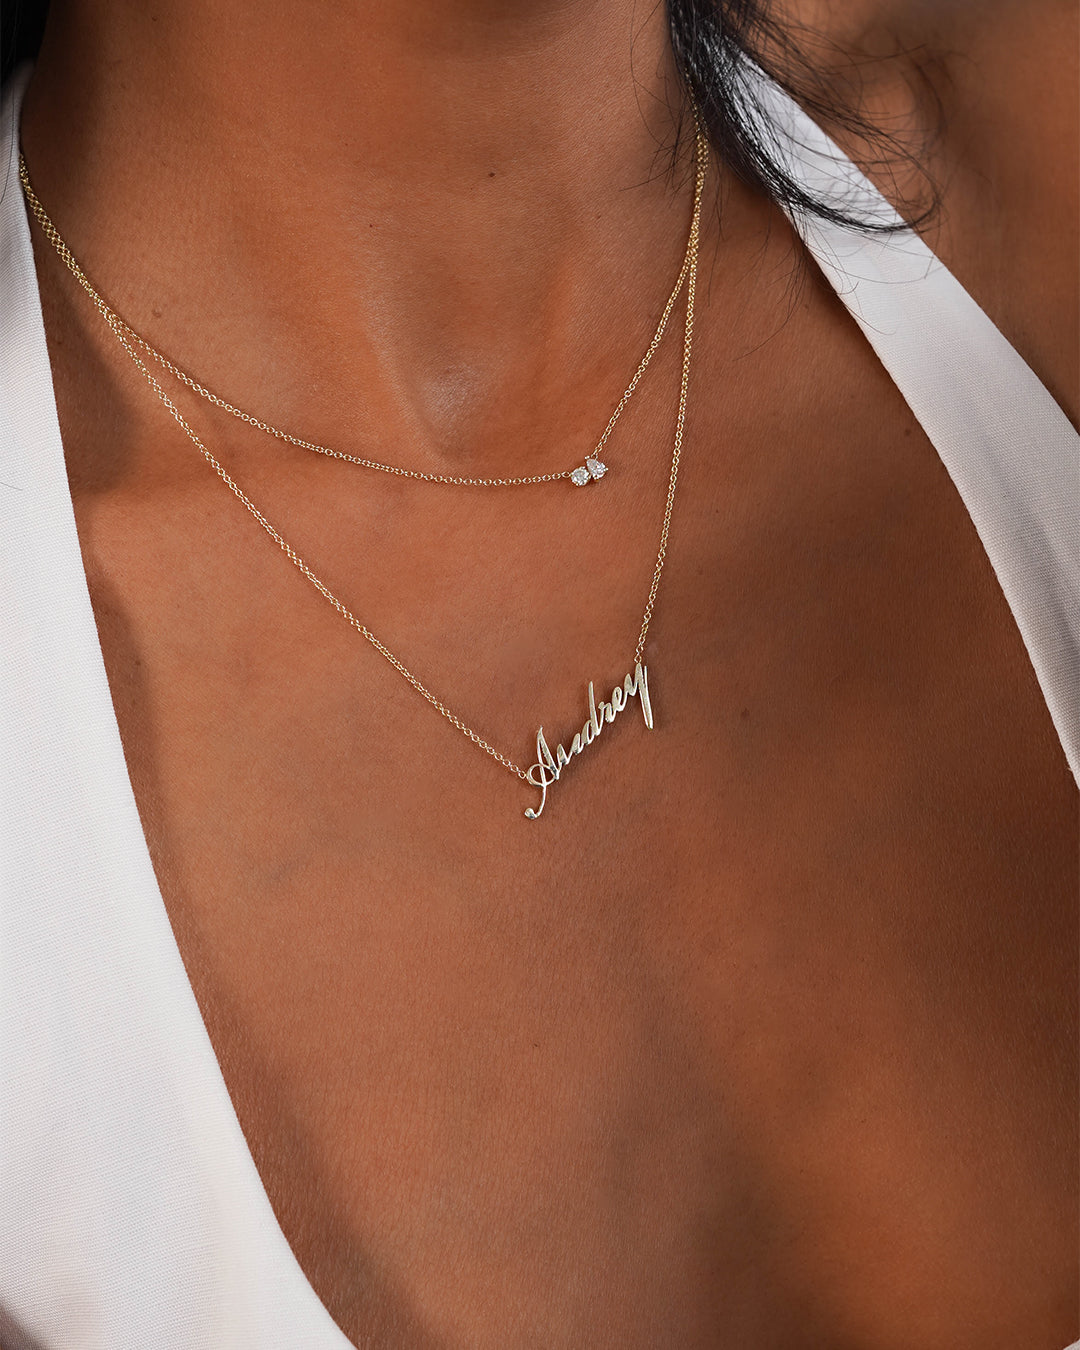 Girl's Dainty Tiff Name Necklace